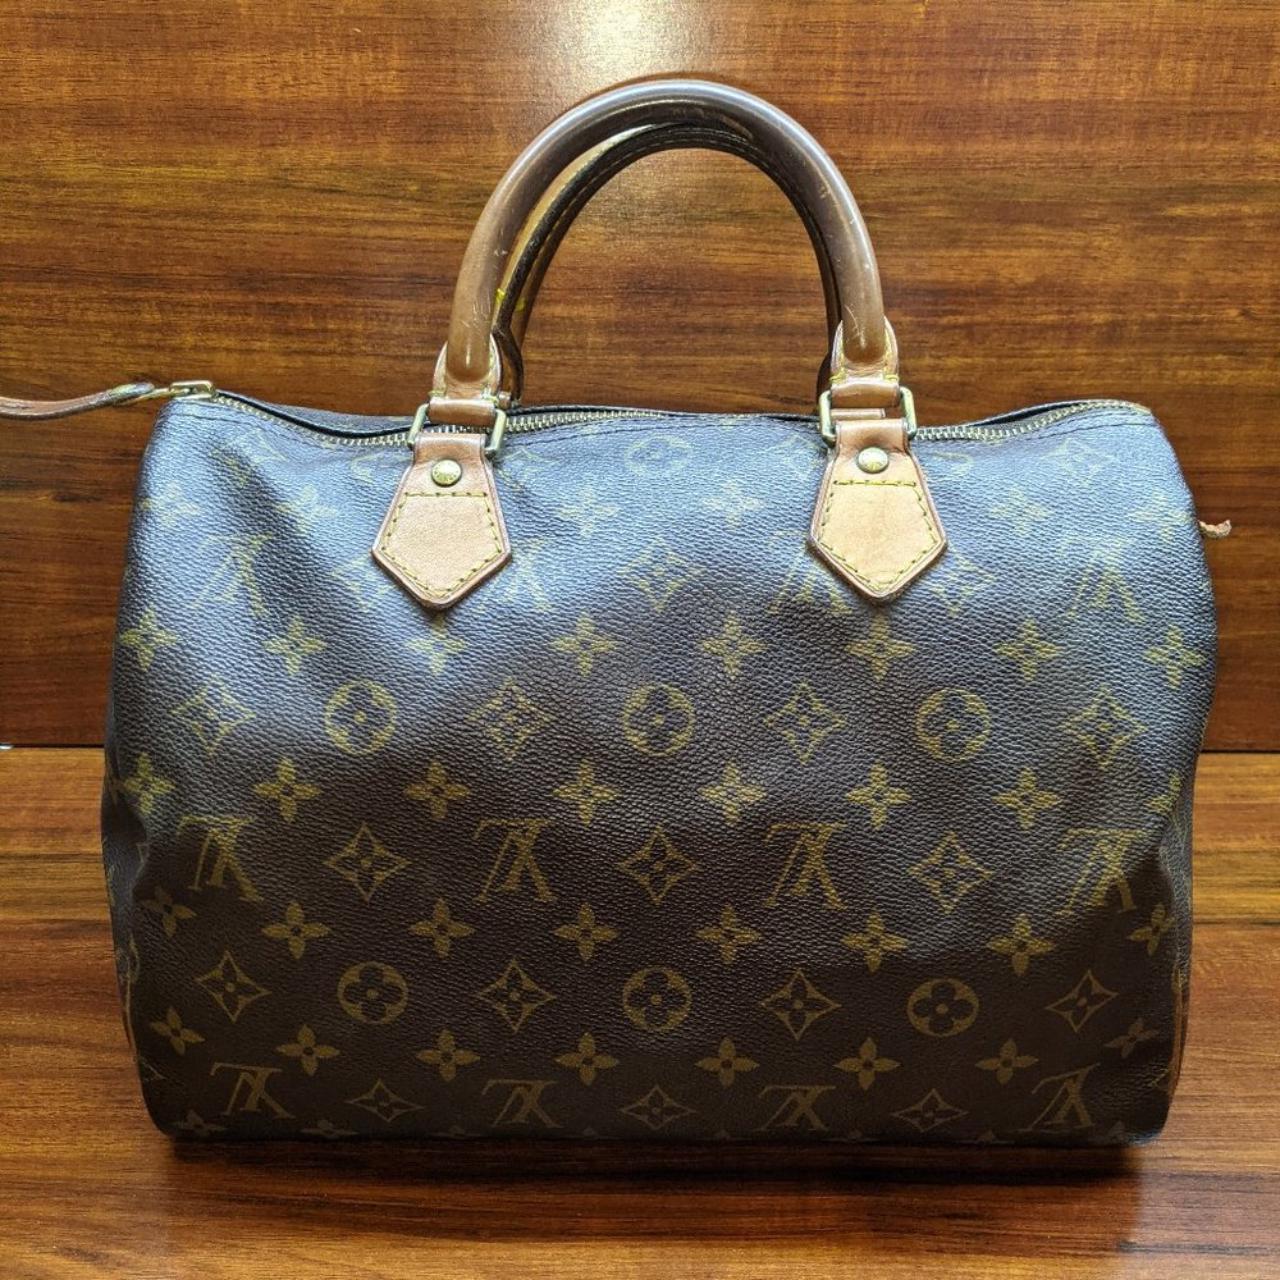 Louis Vuitton Monogram Canvas Speedy 30 (authentic Pre-owned) in